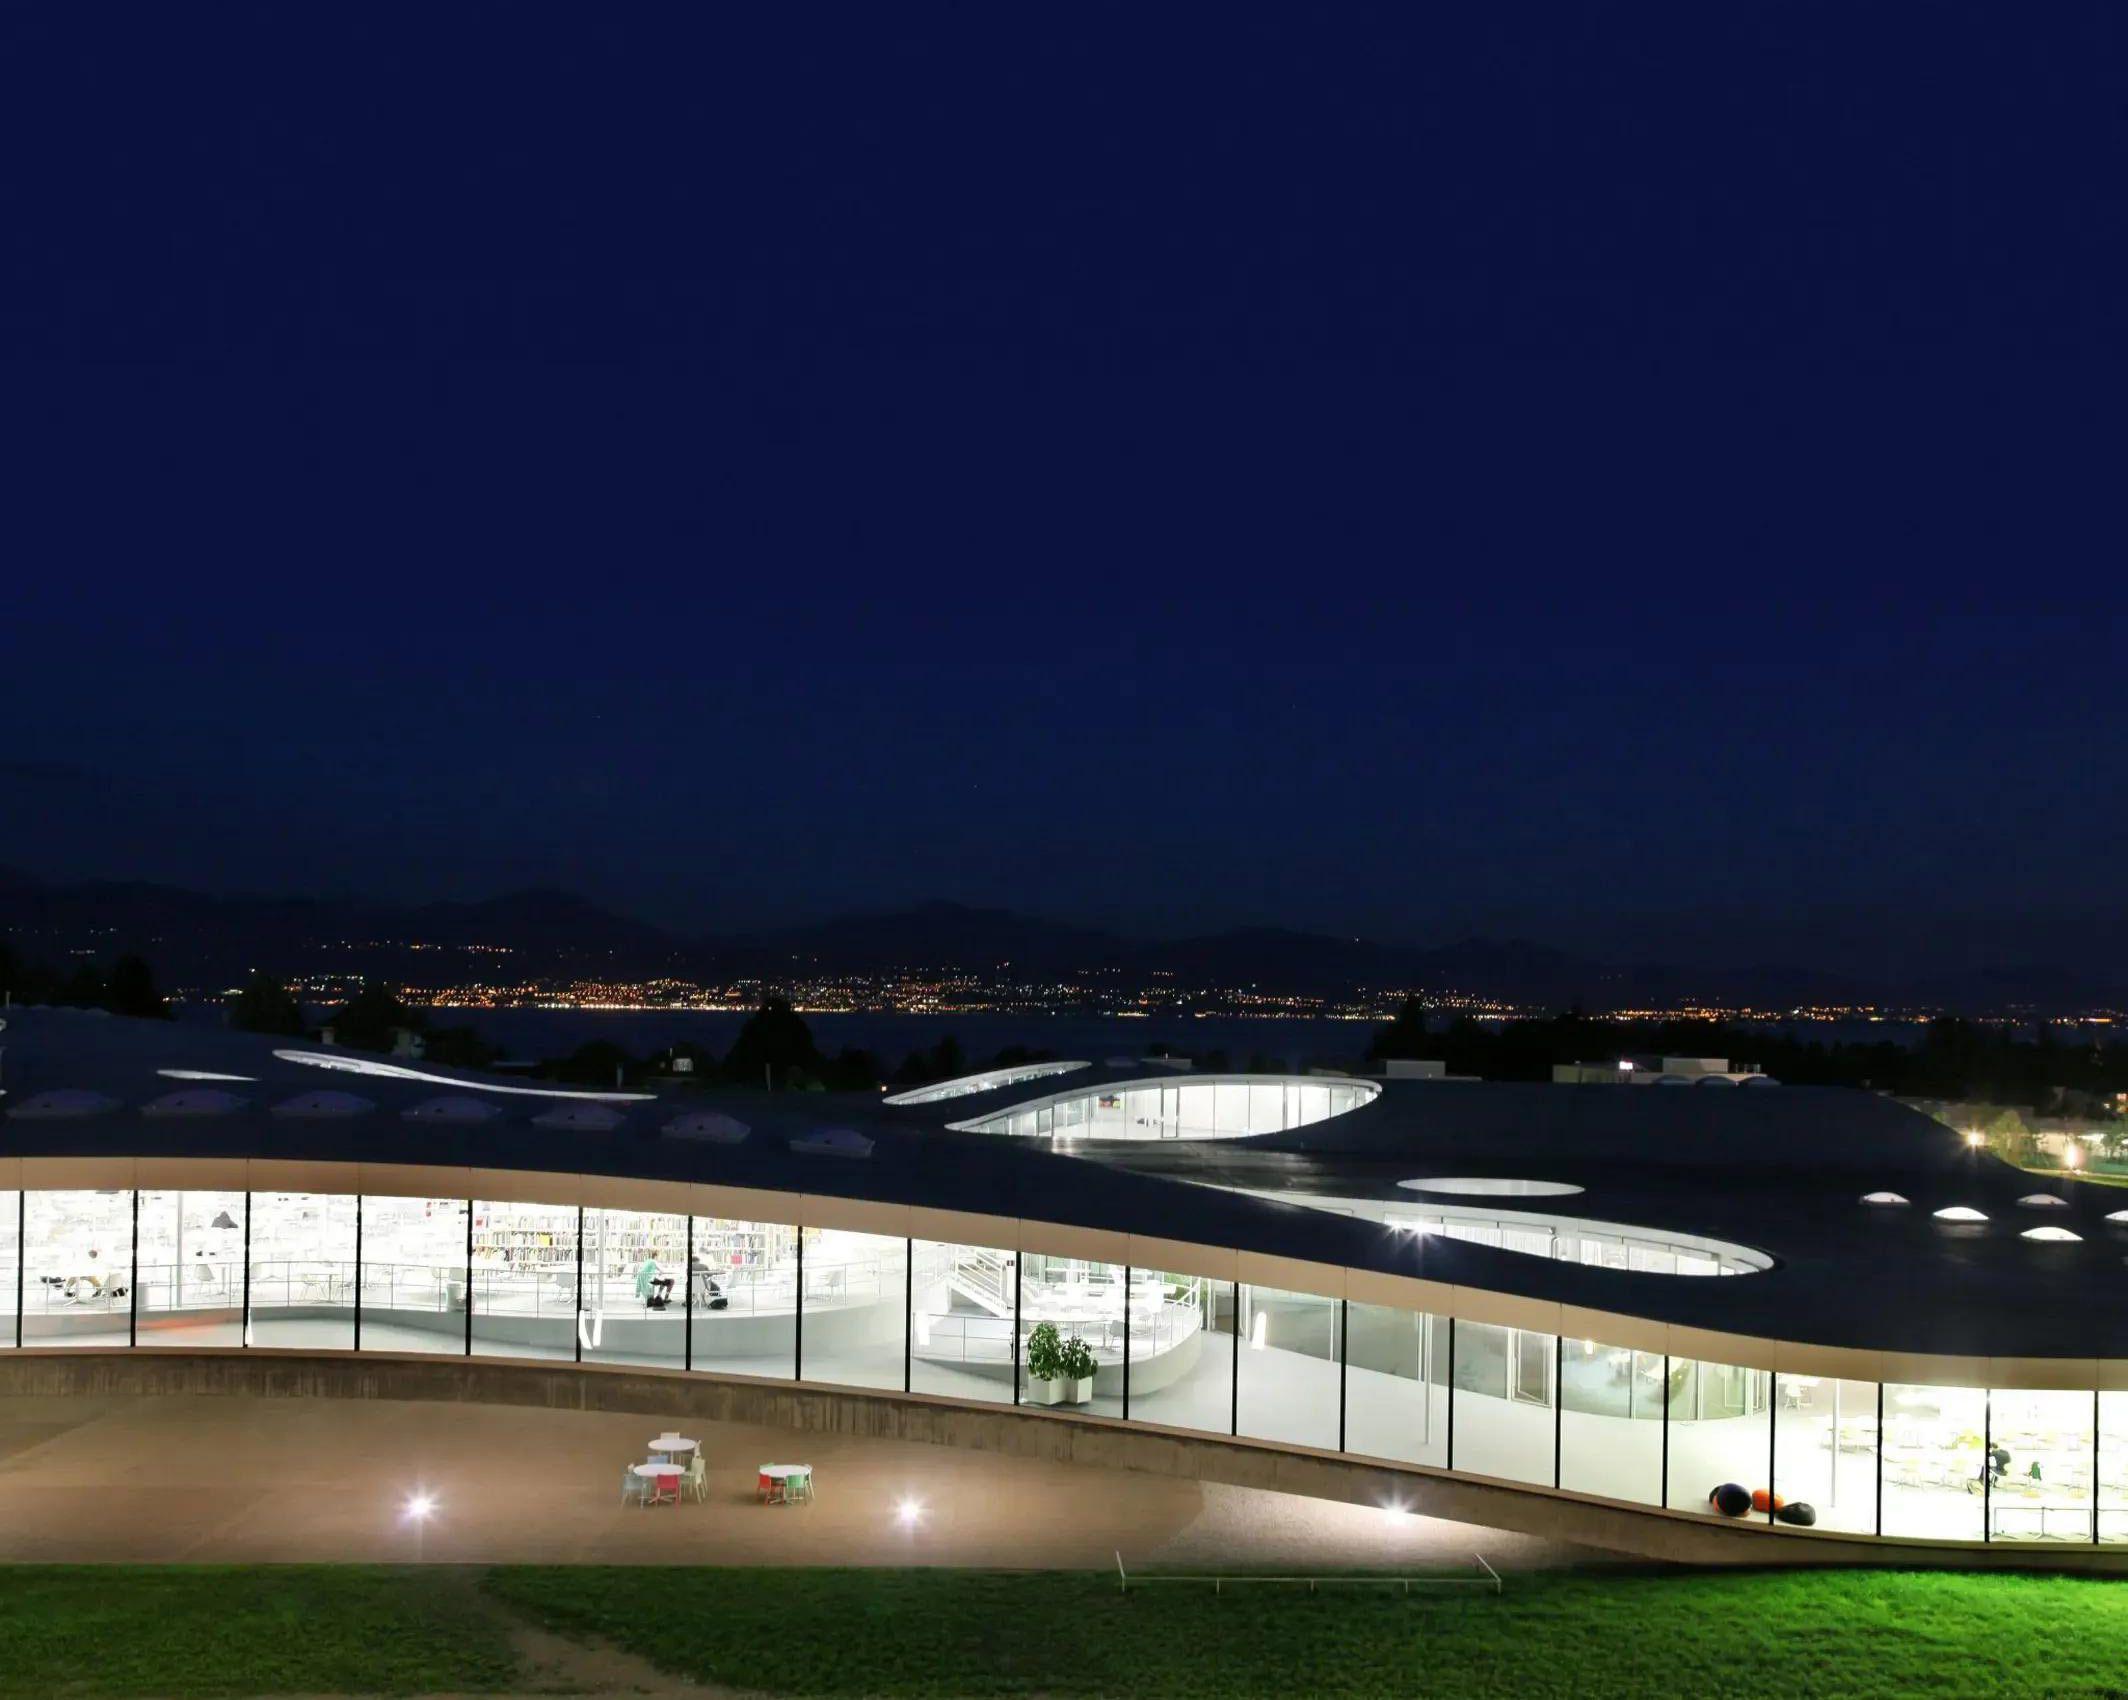 Rolex Learning Center at night